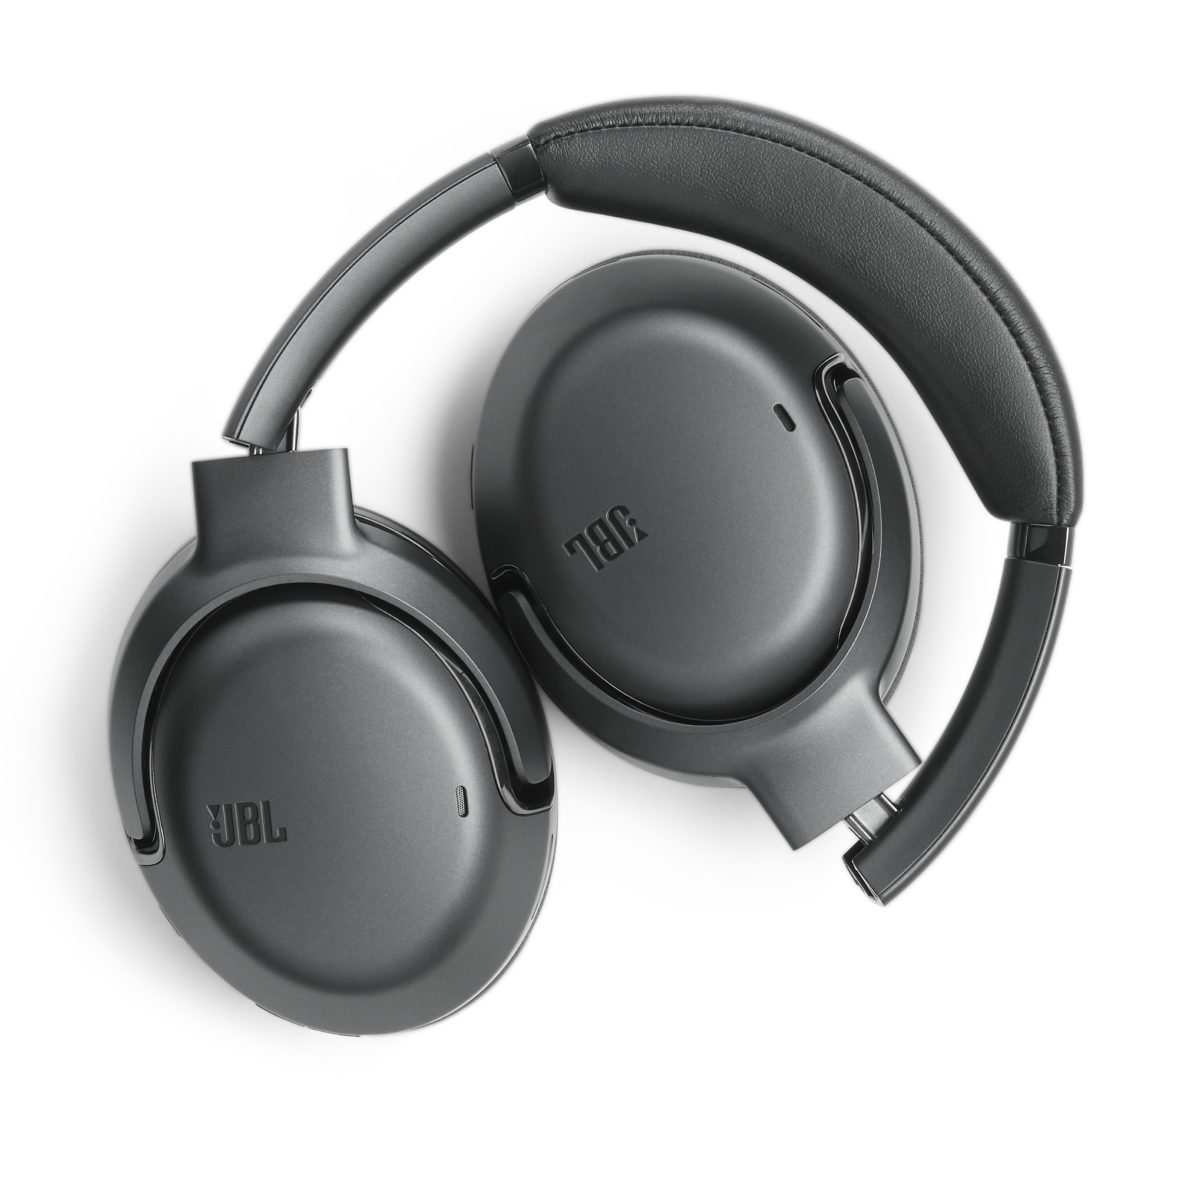 JBL&#8217;s Tour Range Prove Noise-Cancelling Cans Don&#8217;t Need A Hefty Price Tag